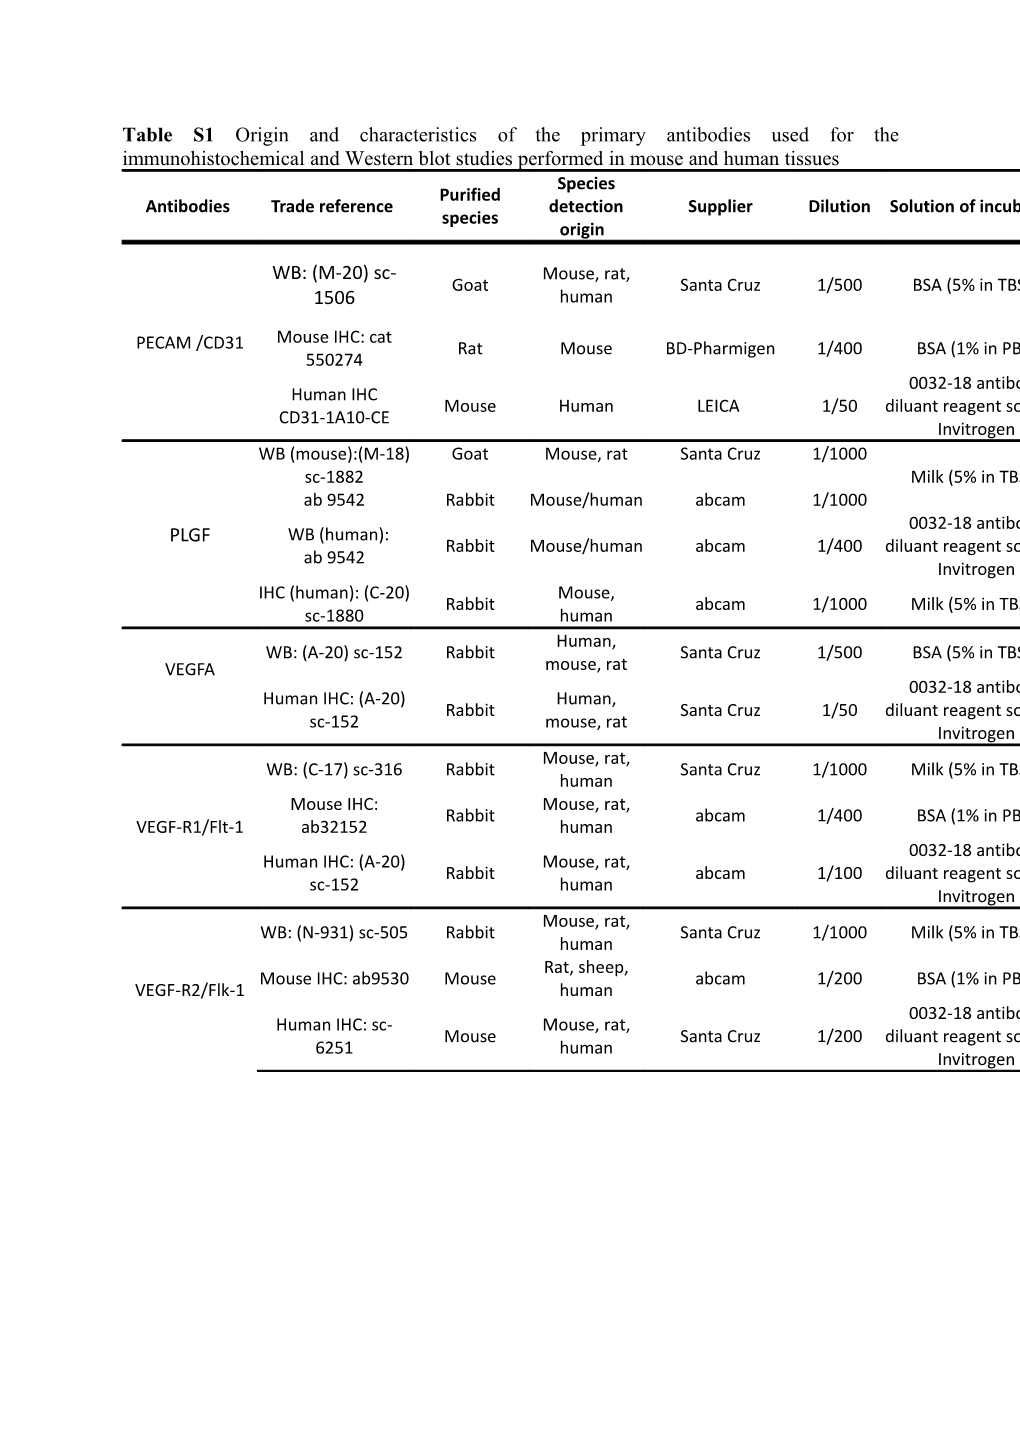 Table S1origin and Characteristics of the Primary Antibodies Used for the Immunohistochemical